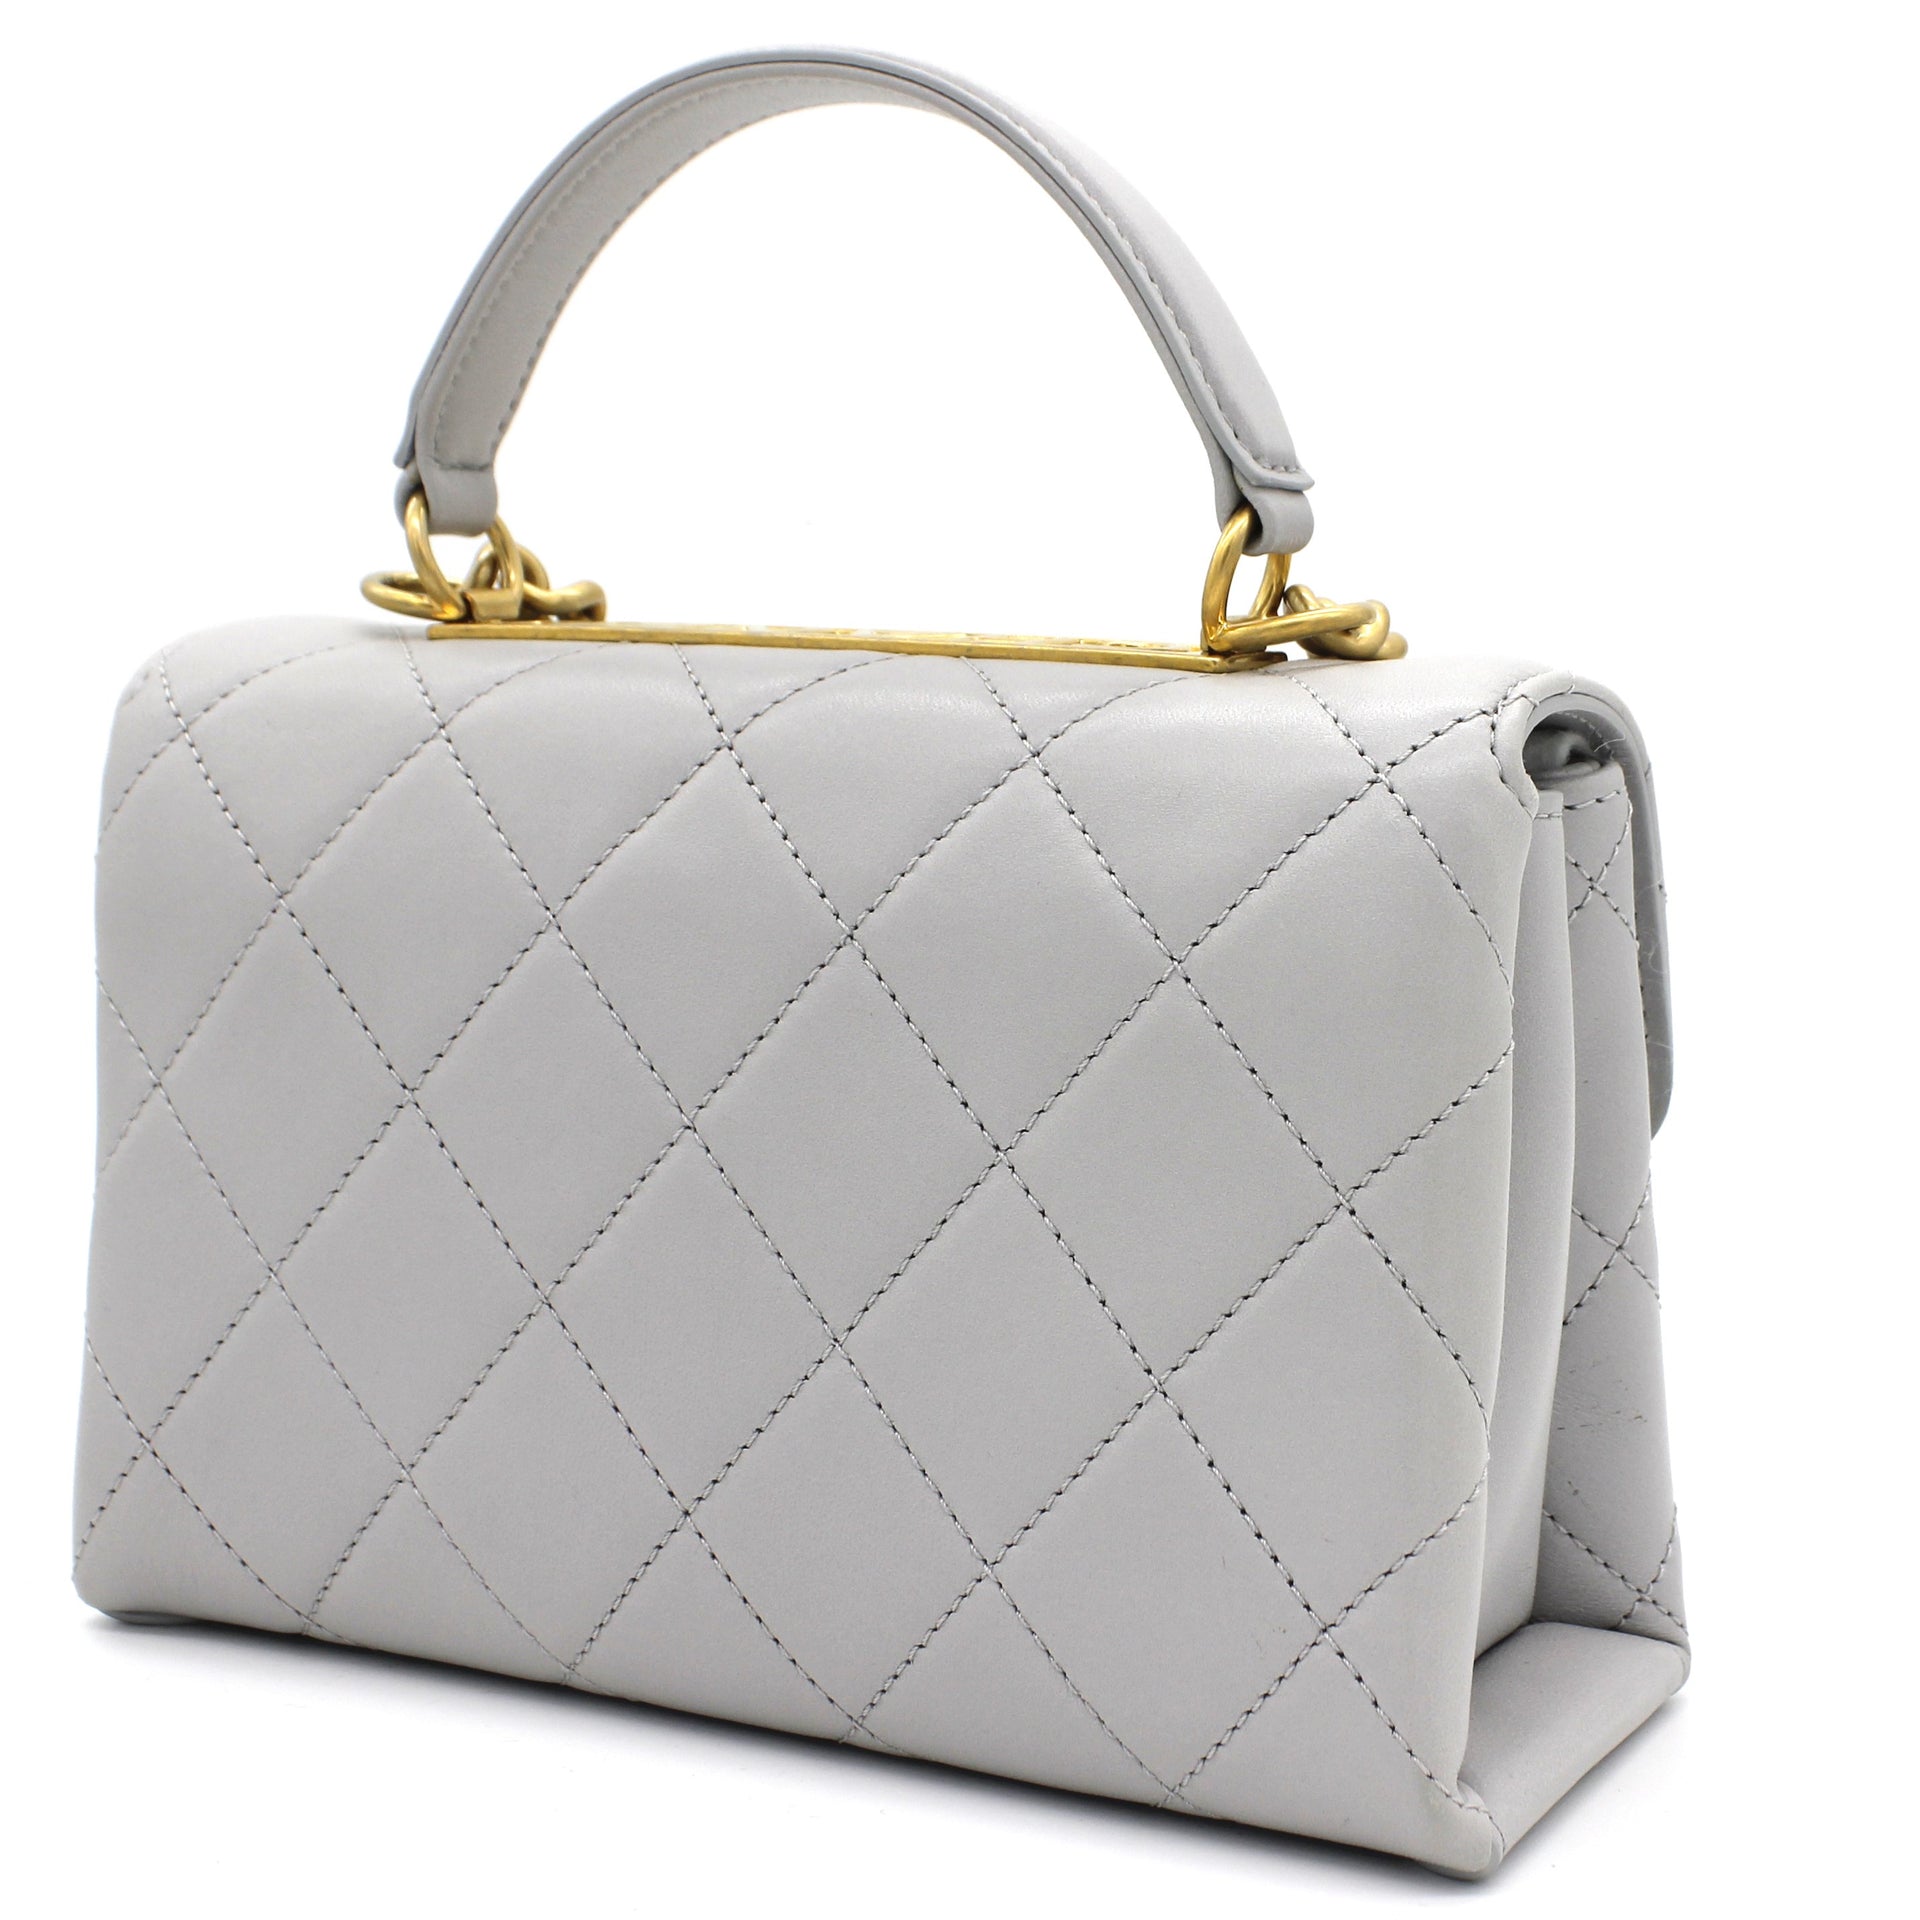 Quilted Lambskin Top Handle Flap Bag